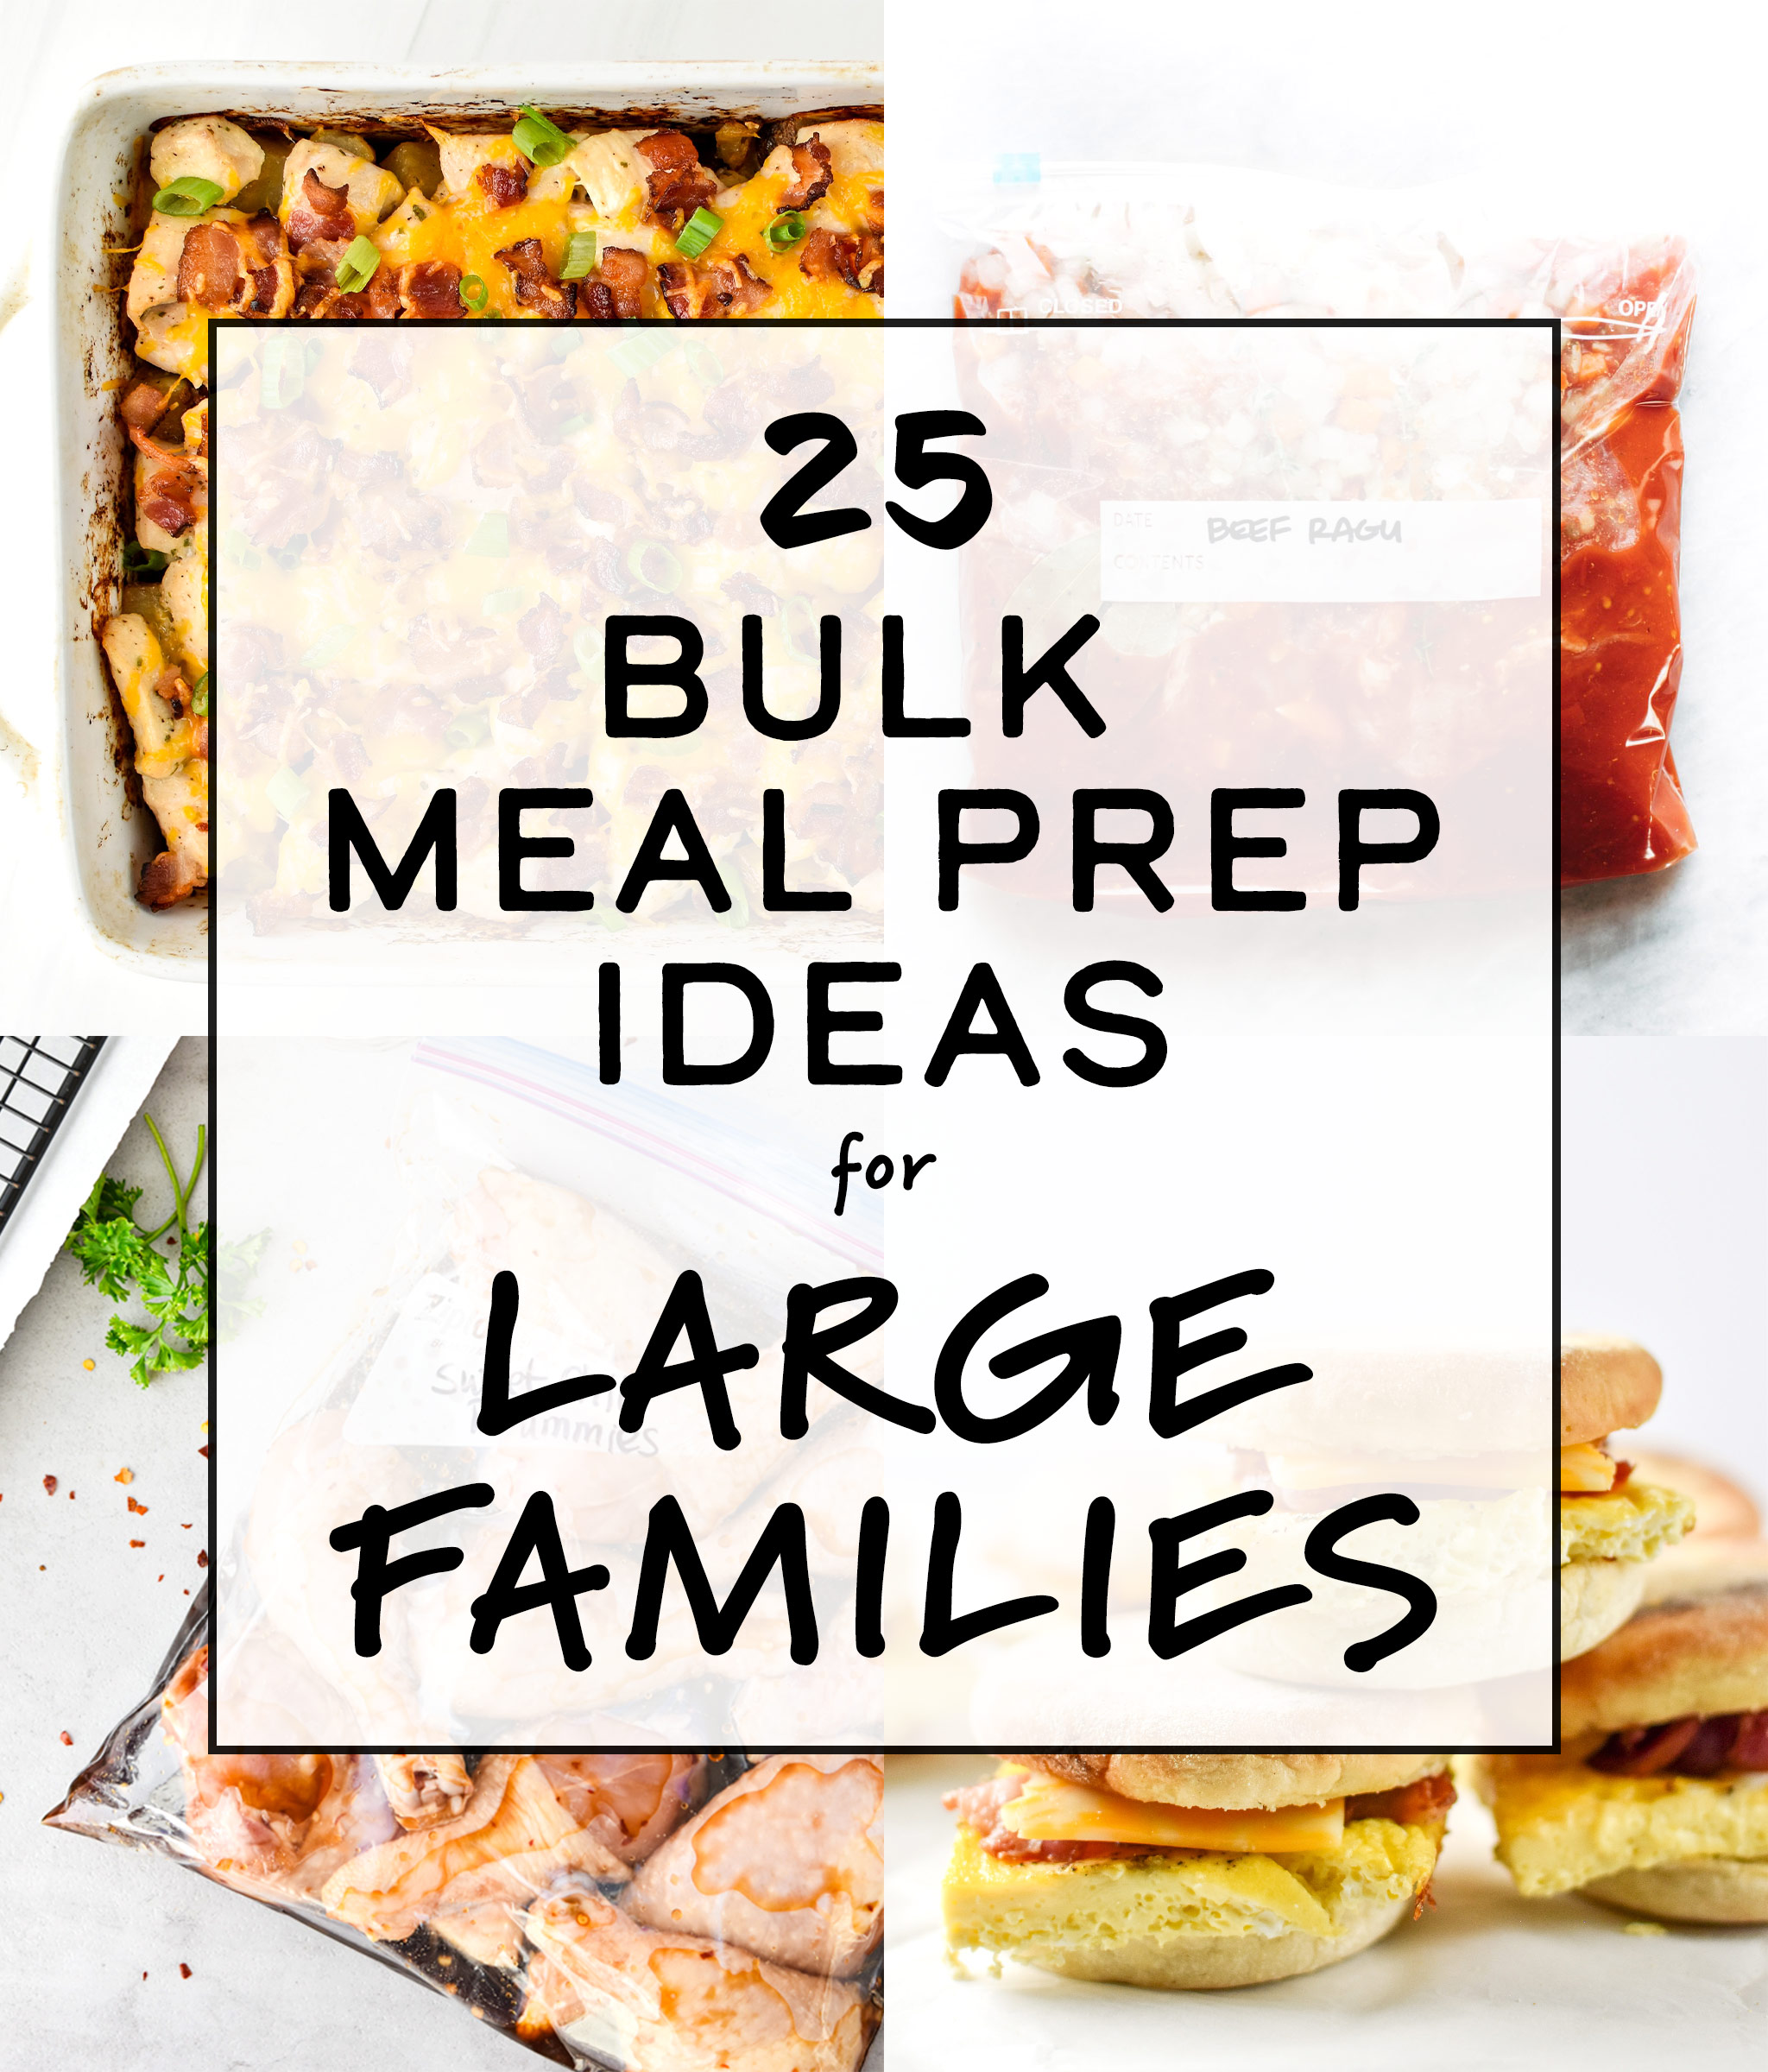 25-bulk-meal-prep-ideas-for-large-families-project-meal-plan